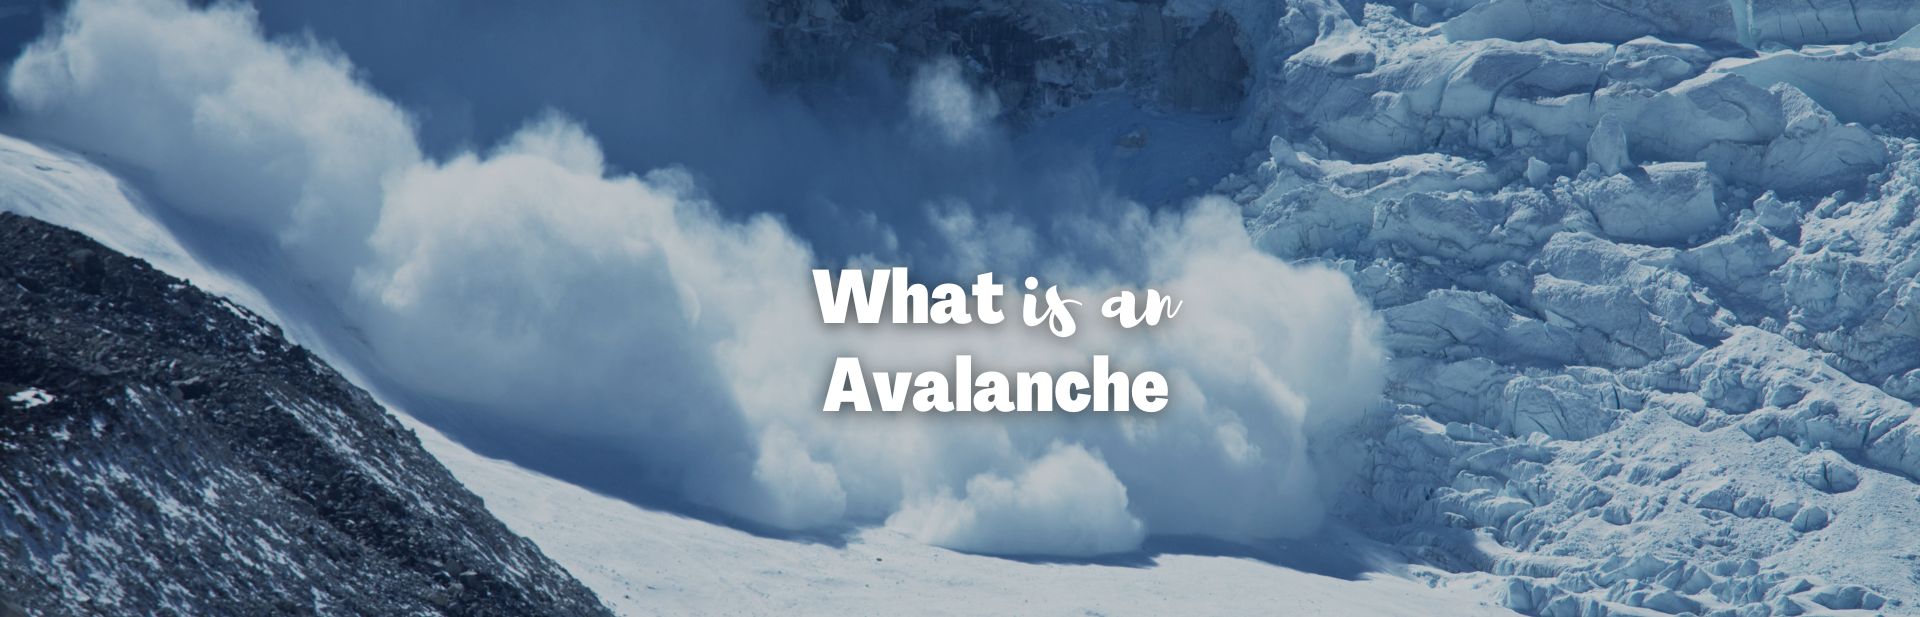 What is an Avalanche? Discover the Types, Causes, and Dangers of These Snowy Disasters